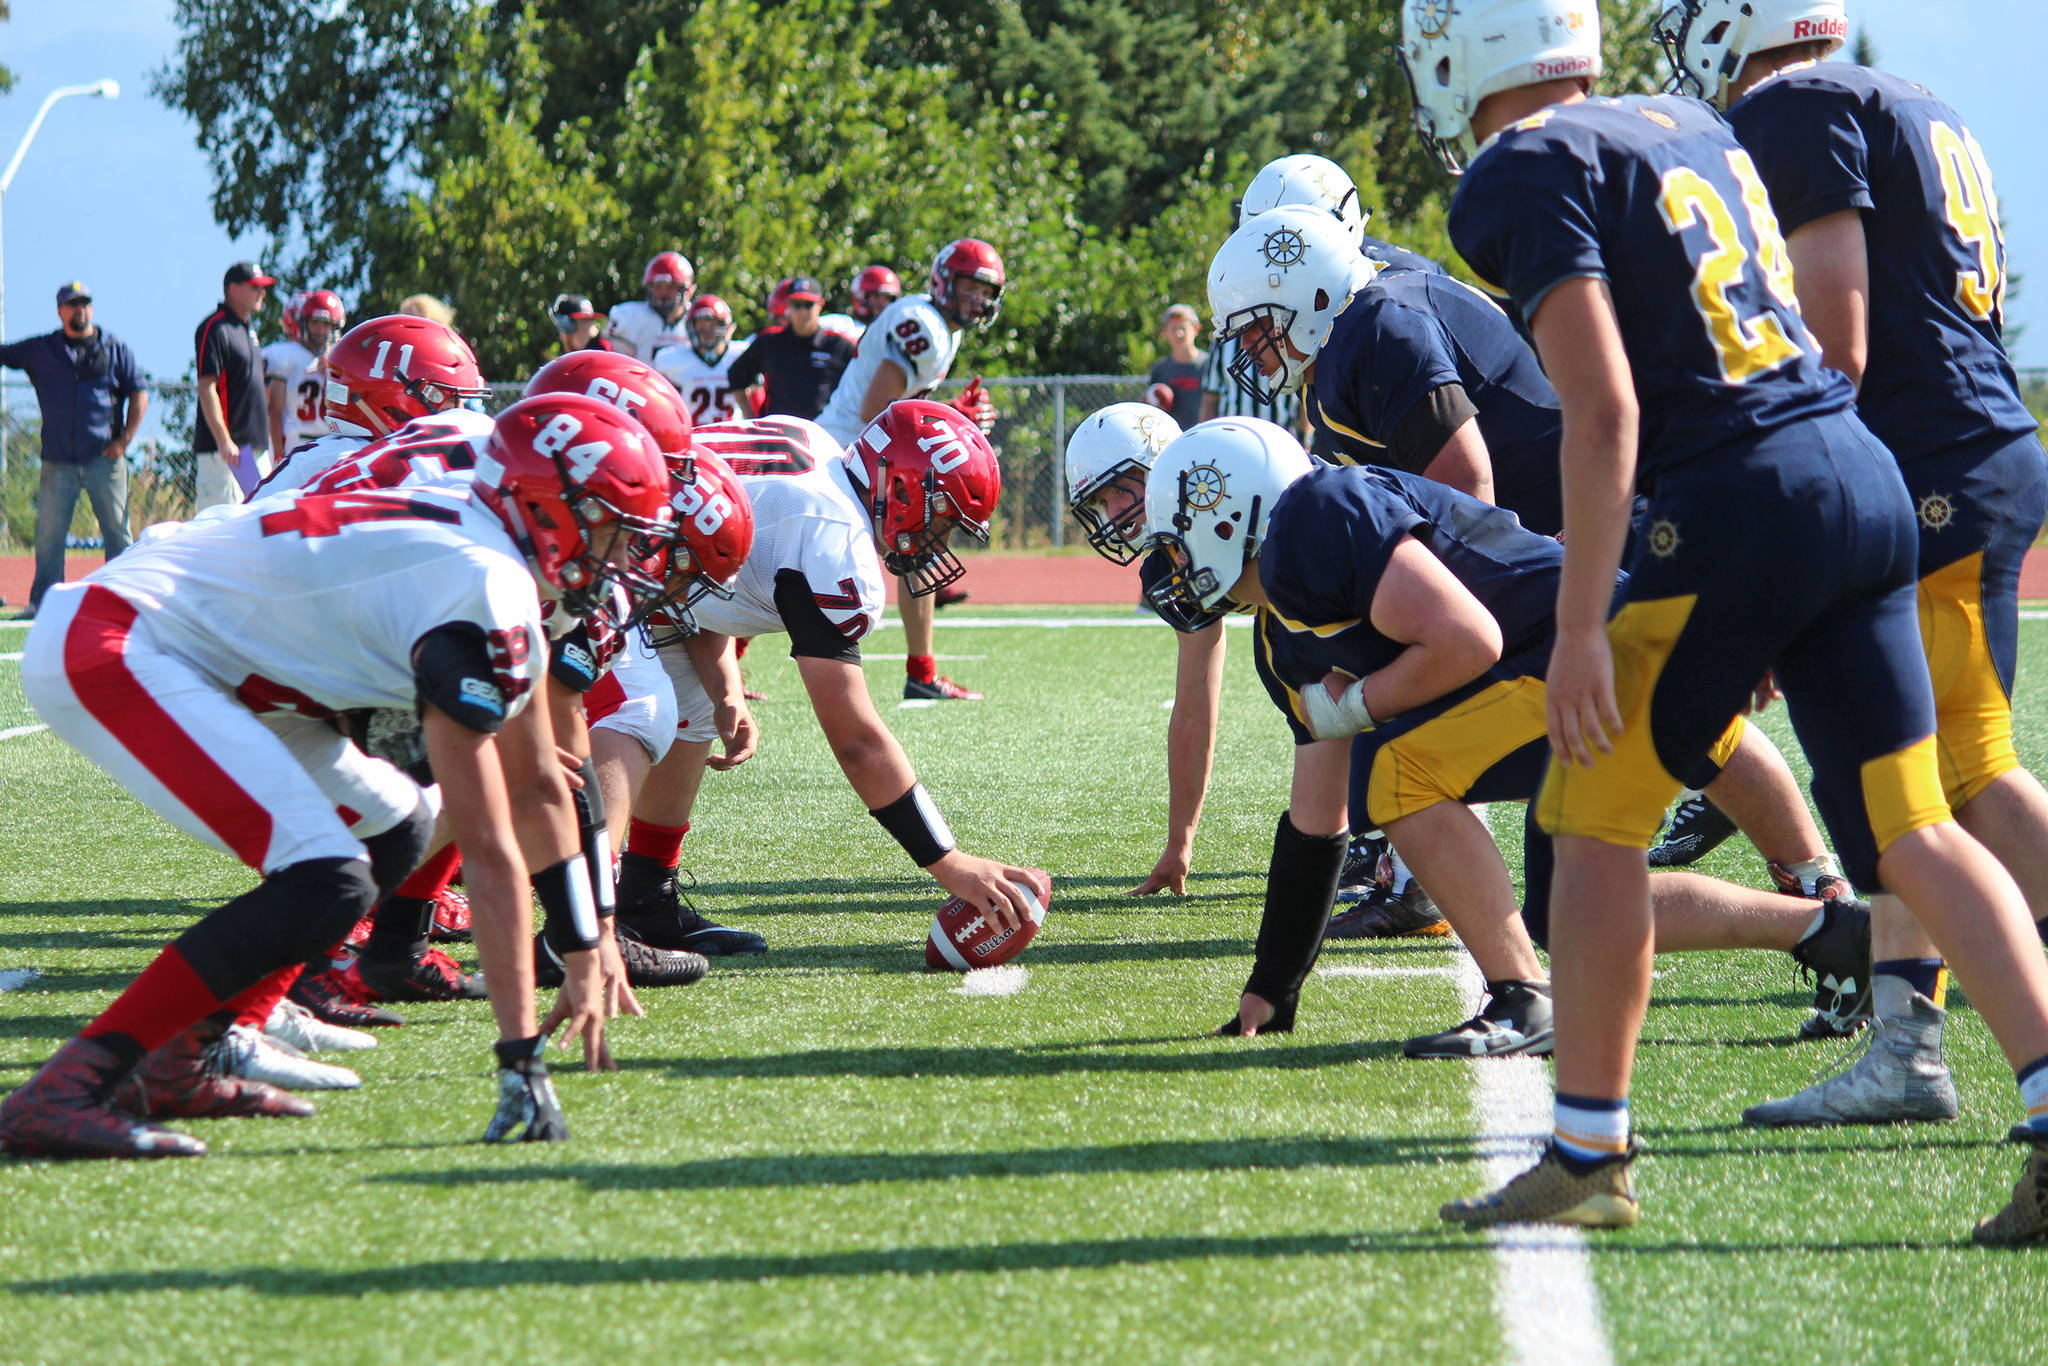 The Kenai Kardinals (left) and Homer Mariners face off against each other in their first varsity football game on the season Saturday, Aug. 17, 2019 in Homer, Alaska. (Photo by Megan Pacer/Homer News)